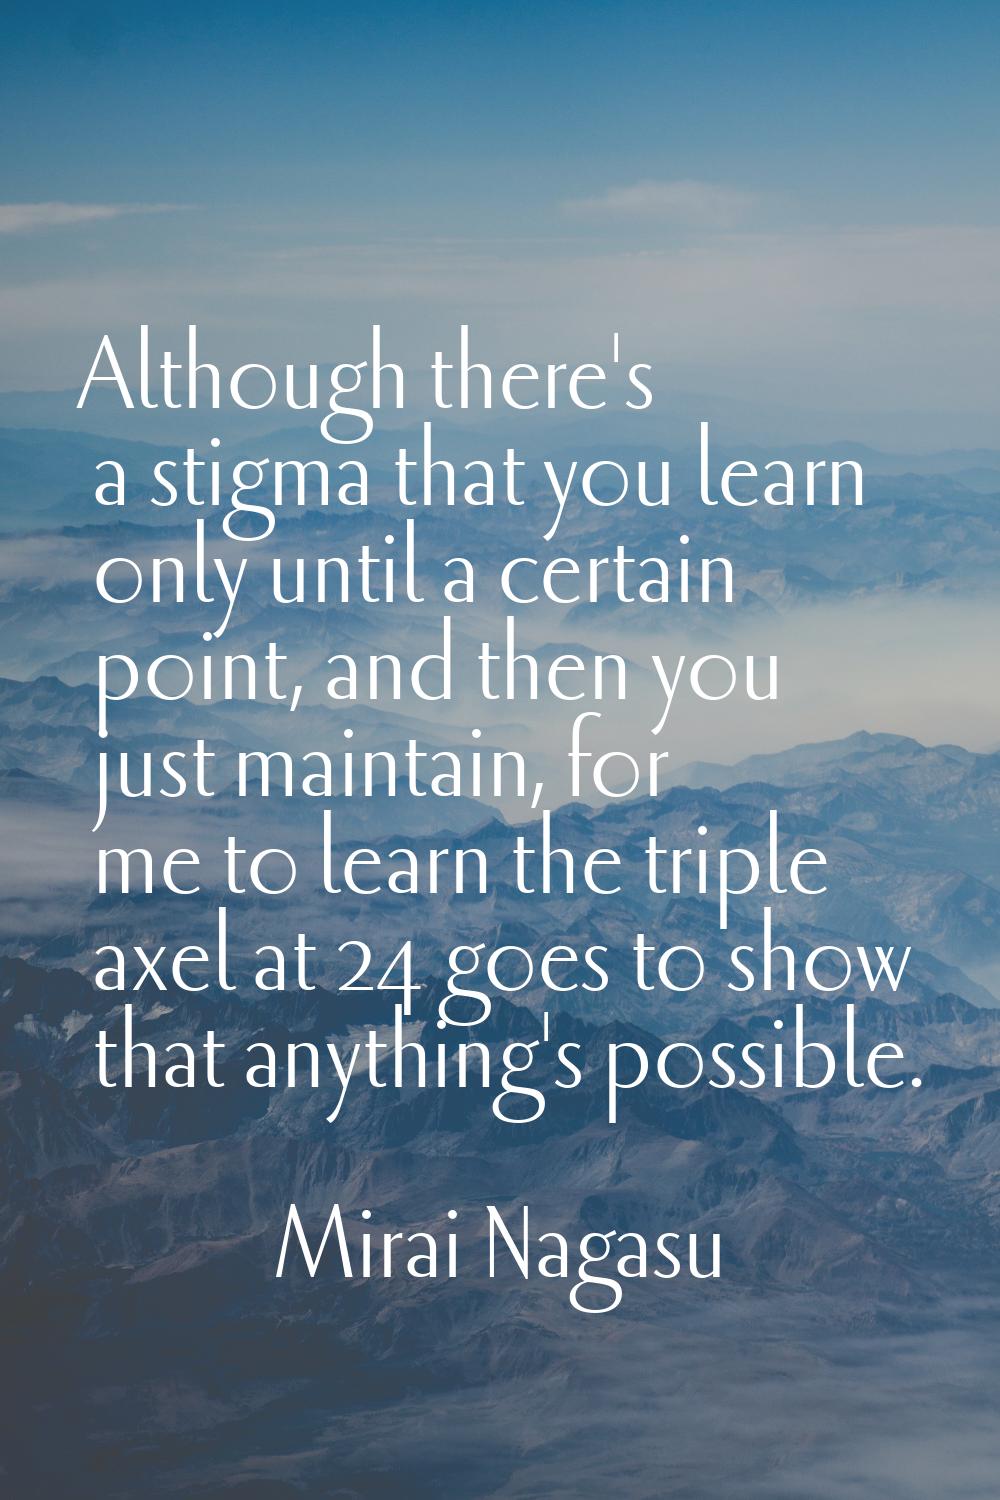 Although there's a stigma that you learn only until a certain point, and then you just maintain, fo